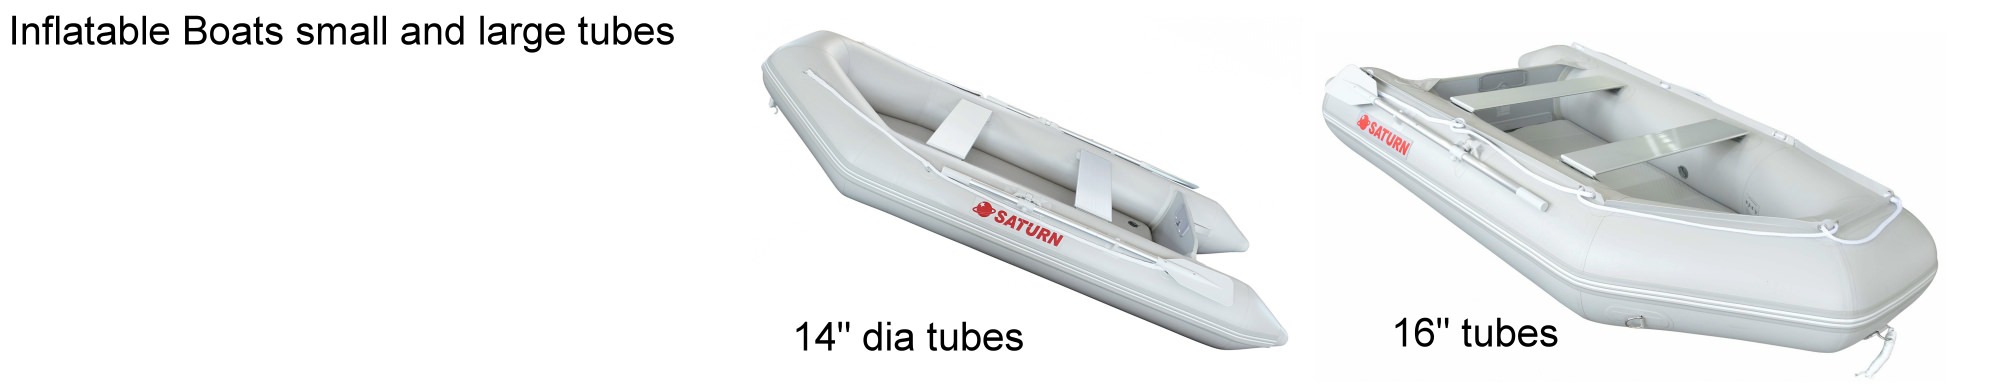 Inflatable boats with small and large tubes